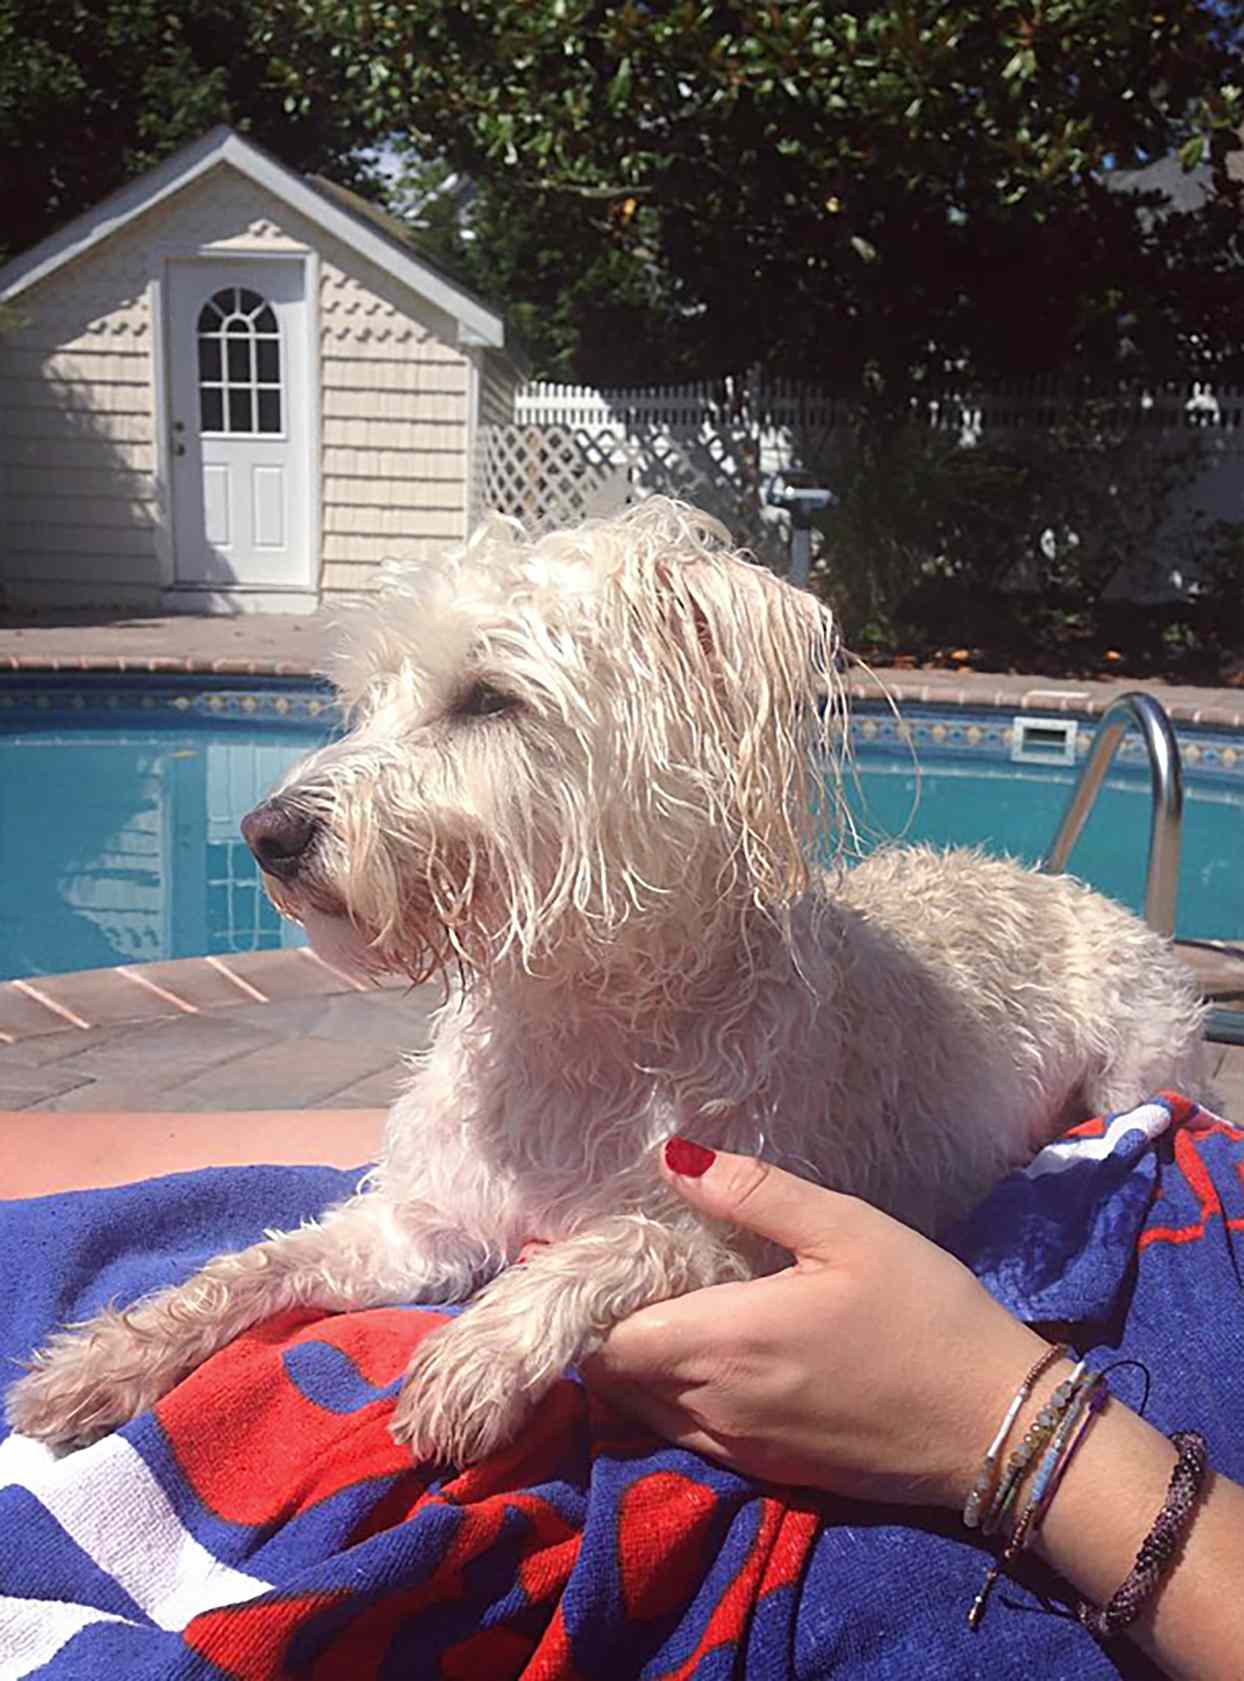 westiepoo lying on a towel at the pool